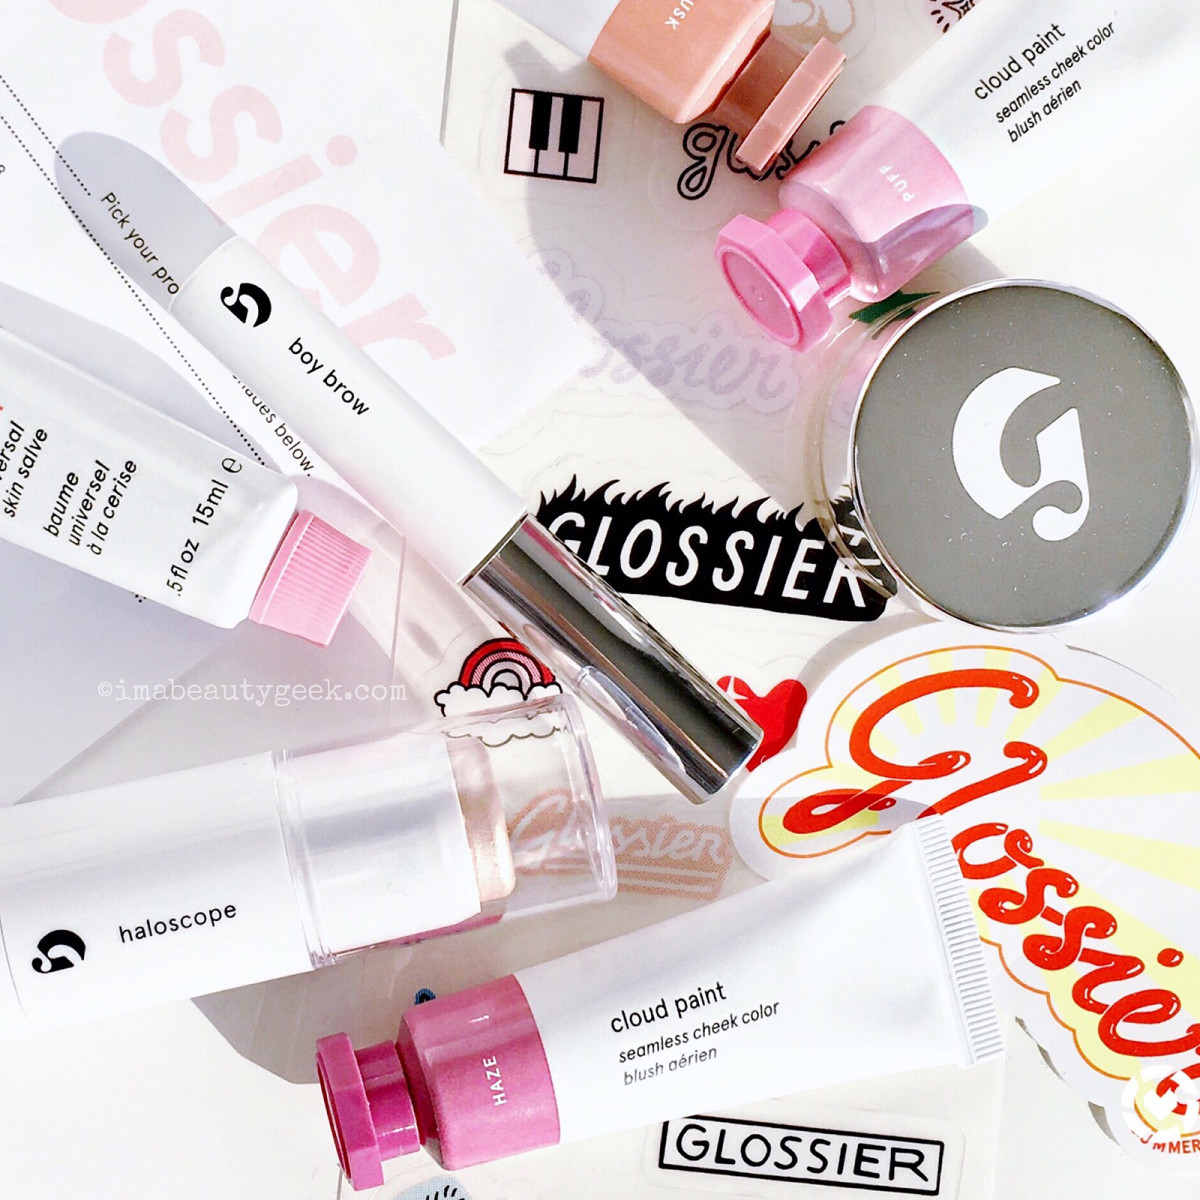 A Glossier pop-up is set to open for 7 days in Toronto